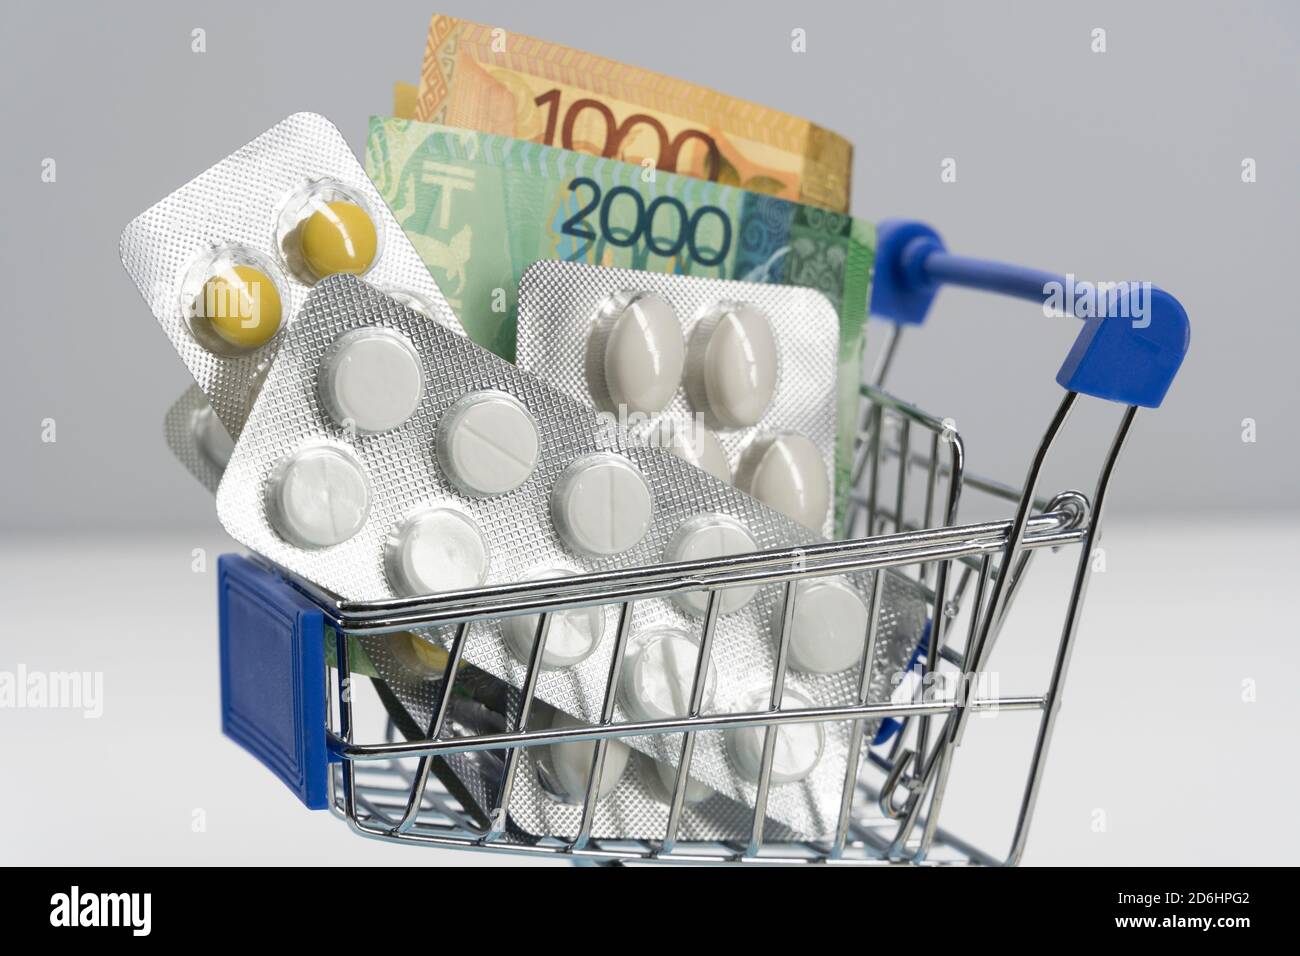 Paid medicine. To buy medicines. Tenge. Kazakhstan. Health system. Economy. Medications for treatment. Medical expenses, expensive treatment. Increase Stock Photo